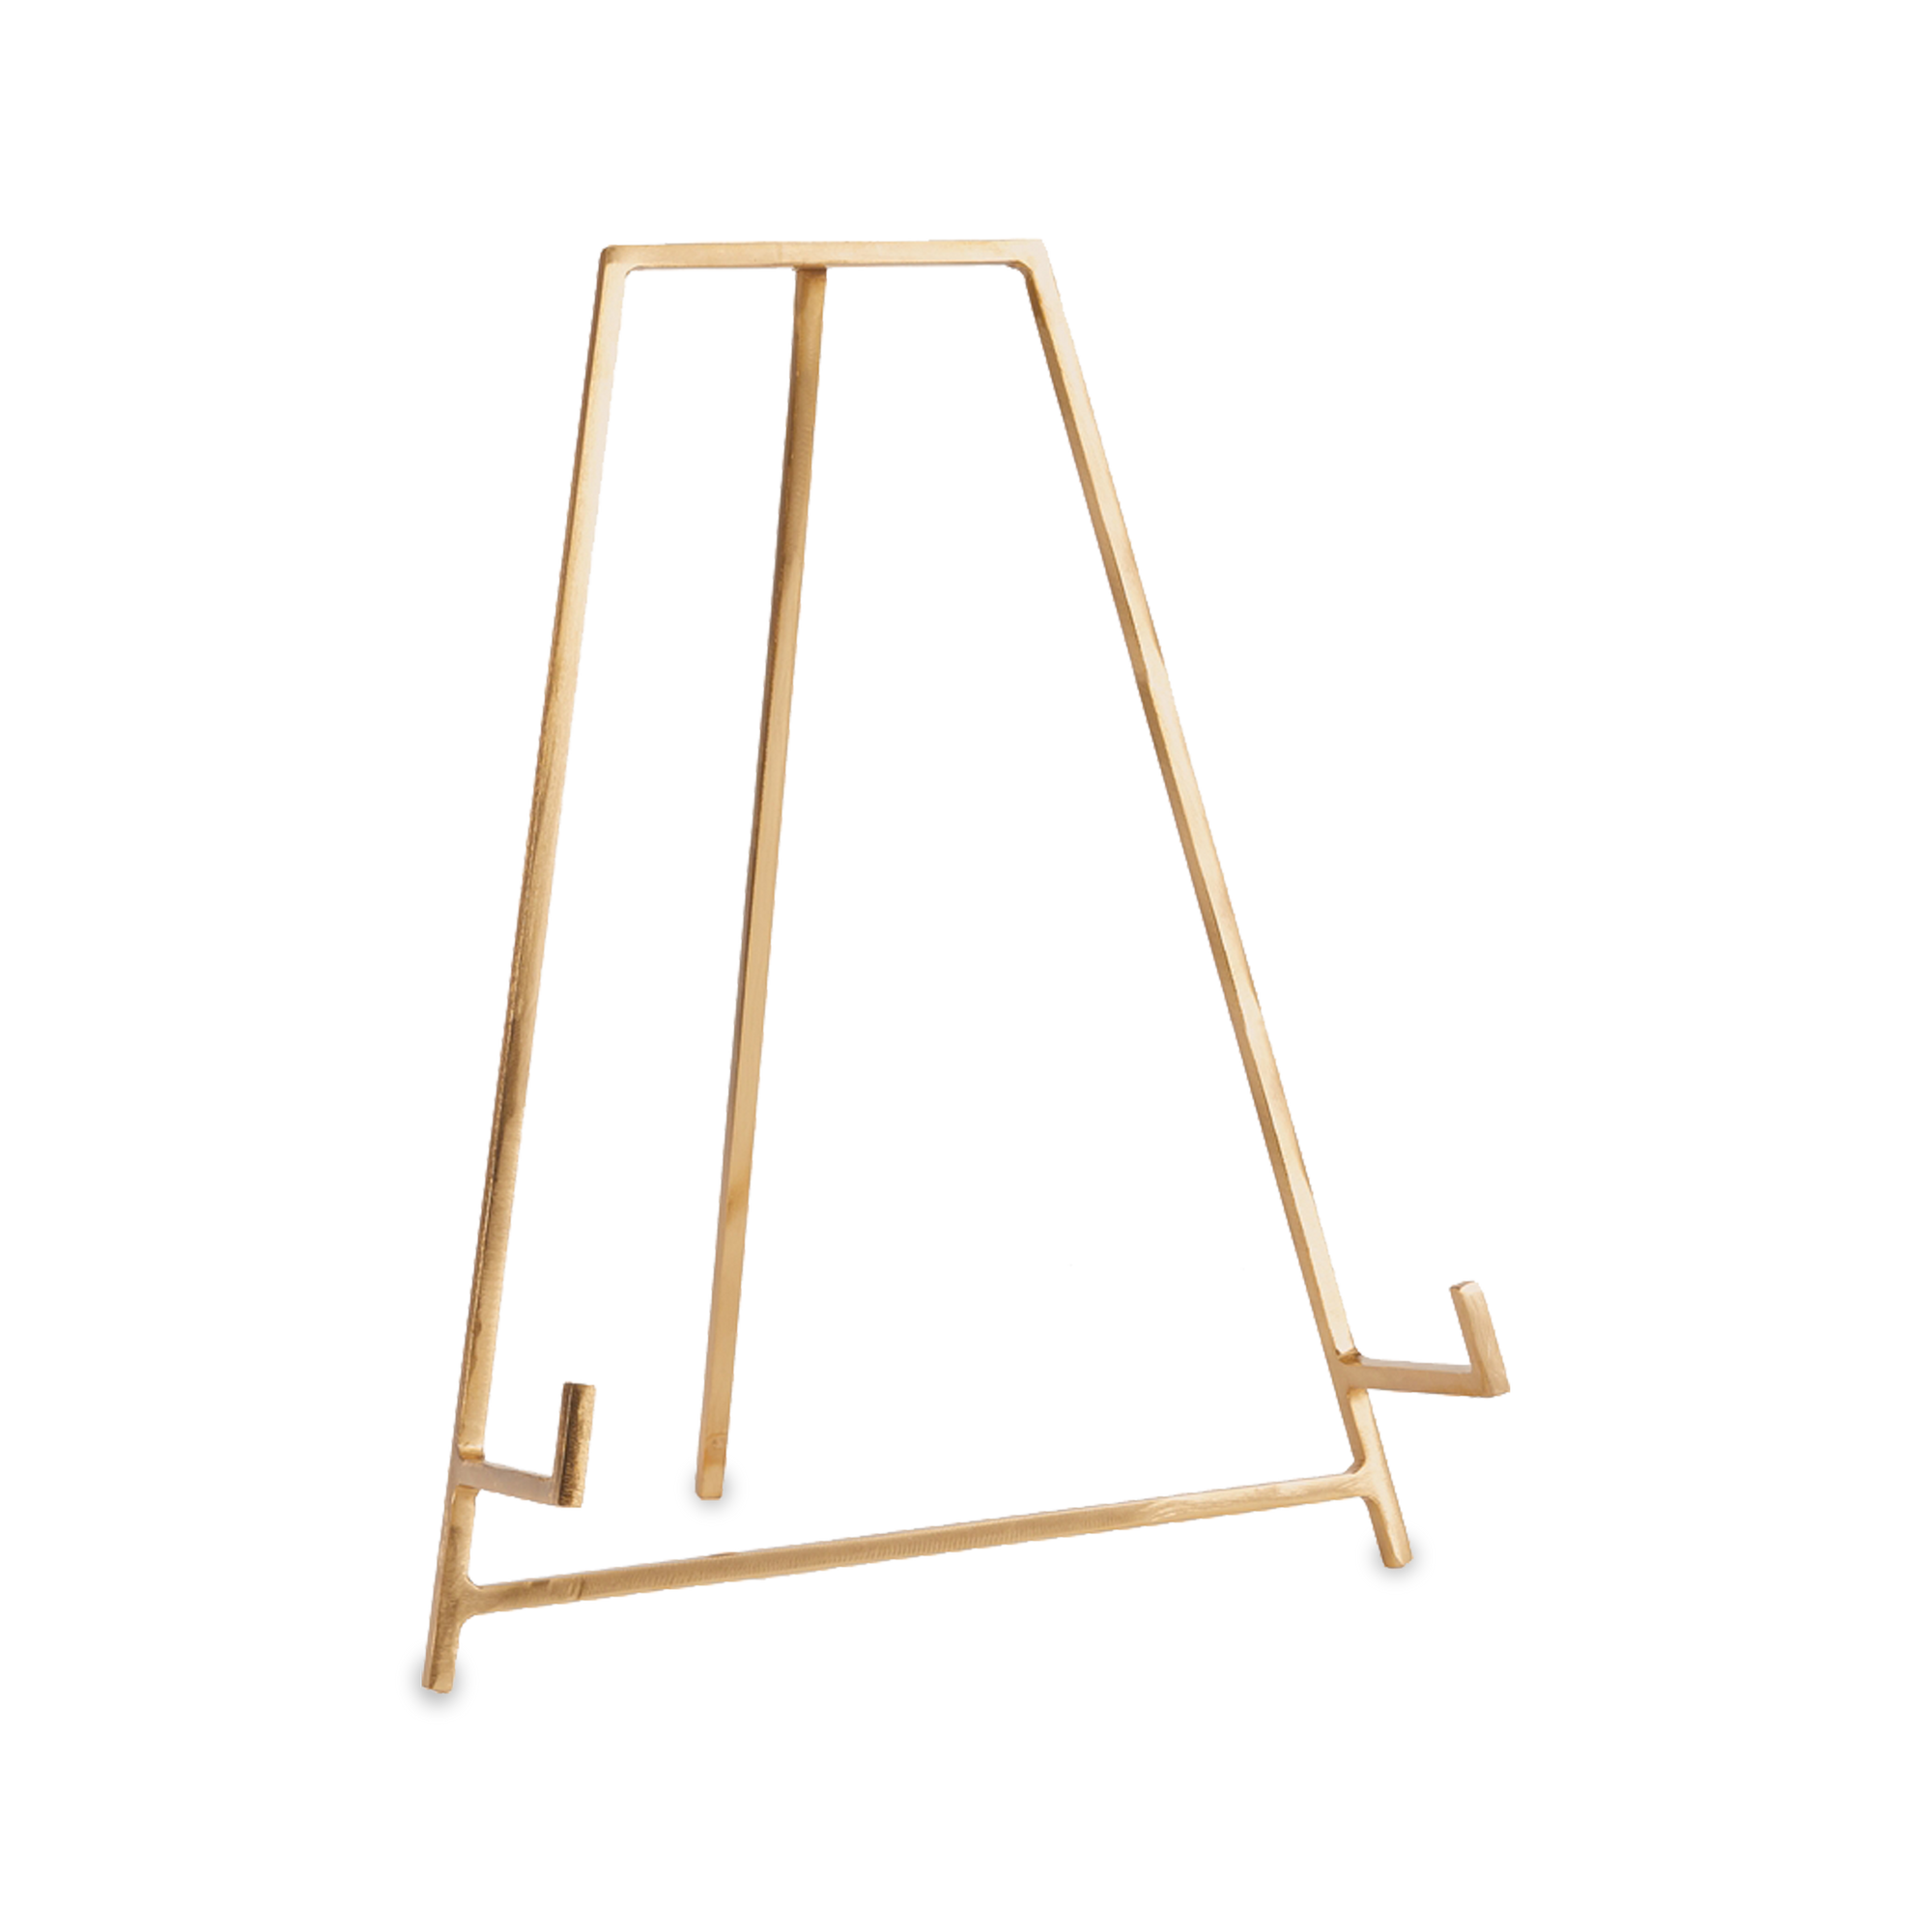 With a minimal and elegant design, the Reims Easel was made to hold platters, cookbooks or art.